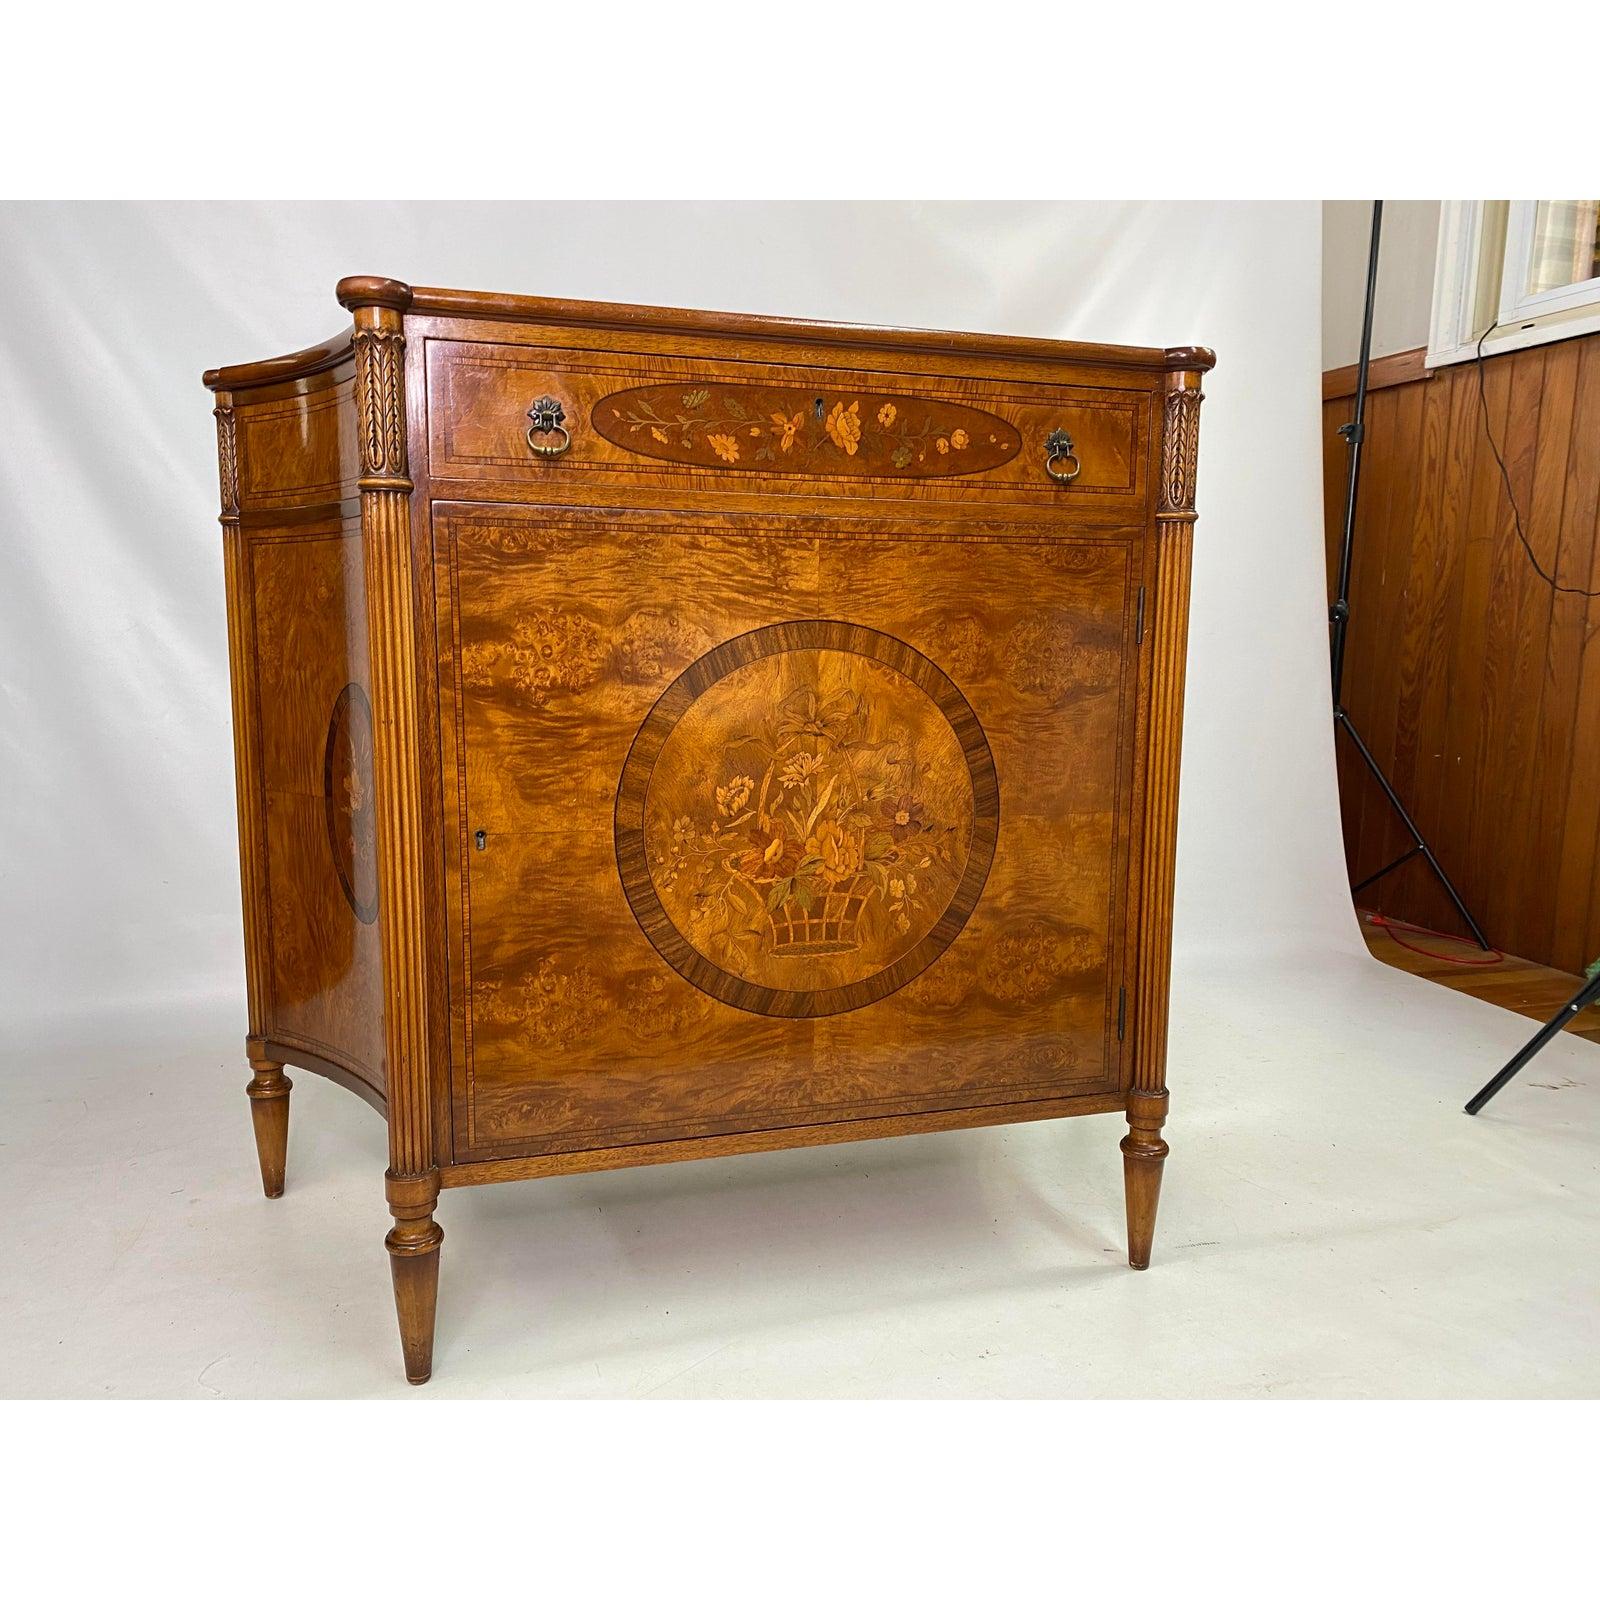 Exceptional Joseph Gerte Co. Regency-style inlaid mahogany and burl veneer side swell cabinet.